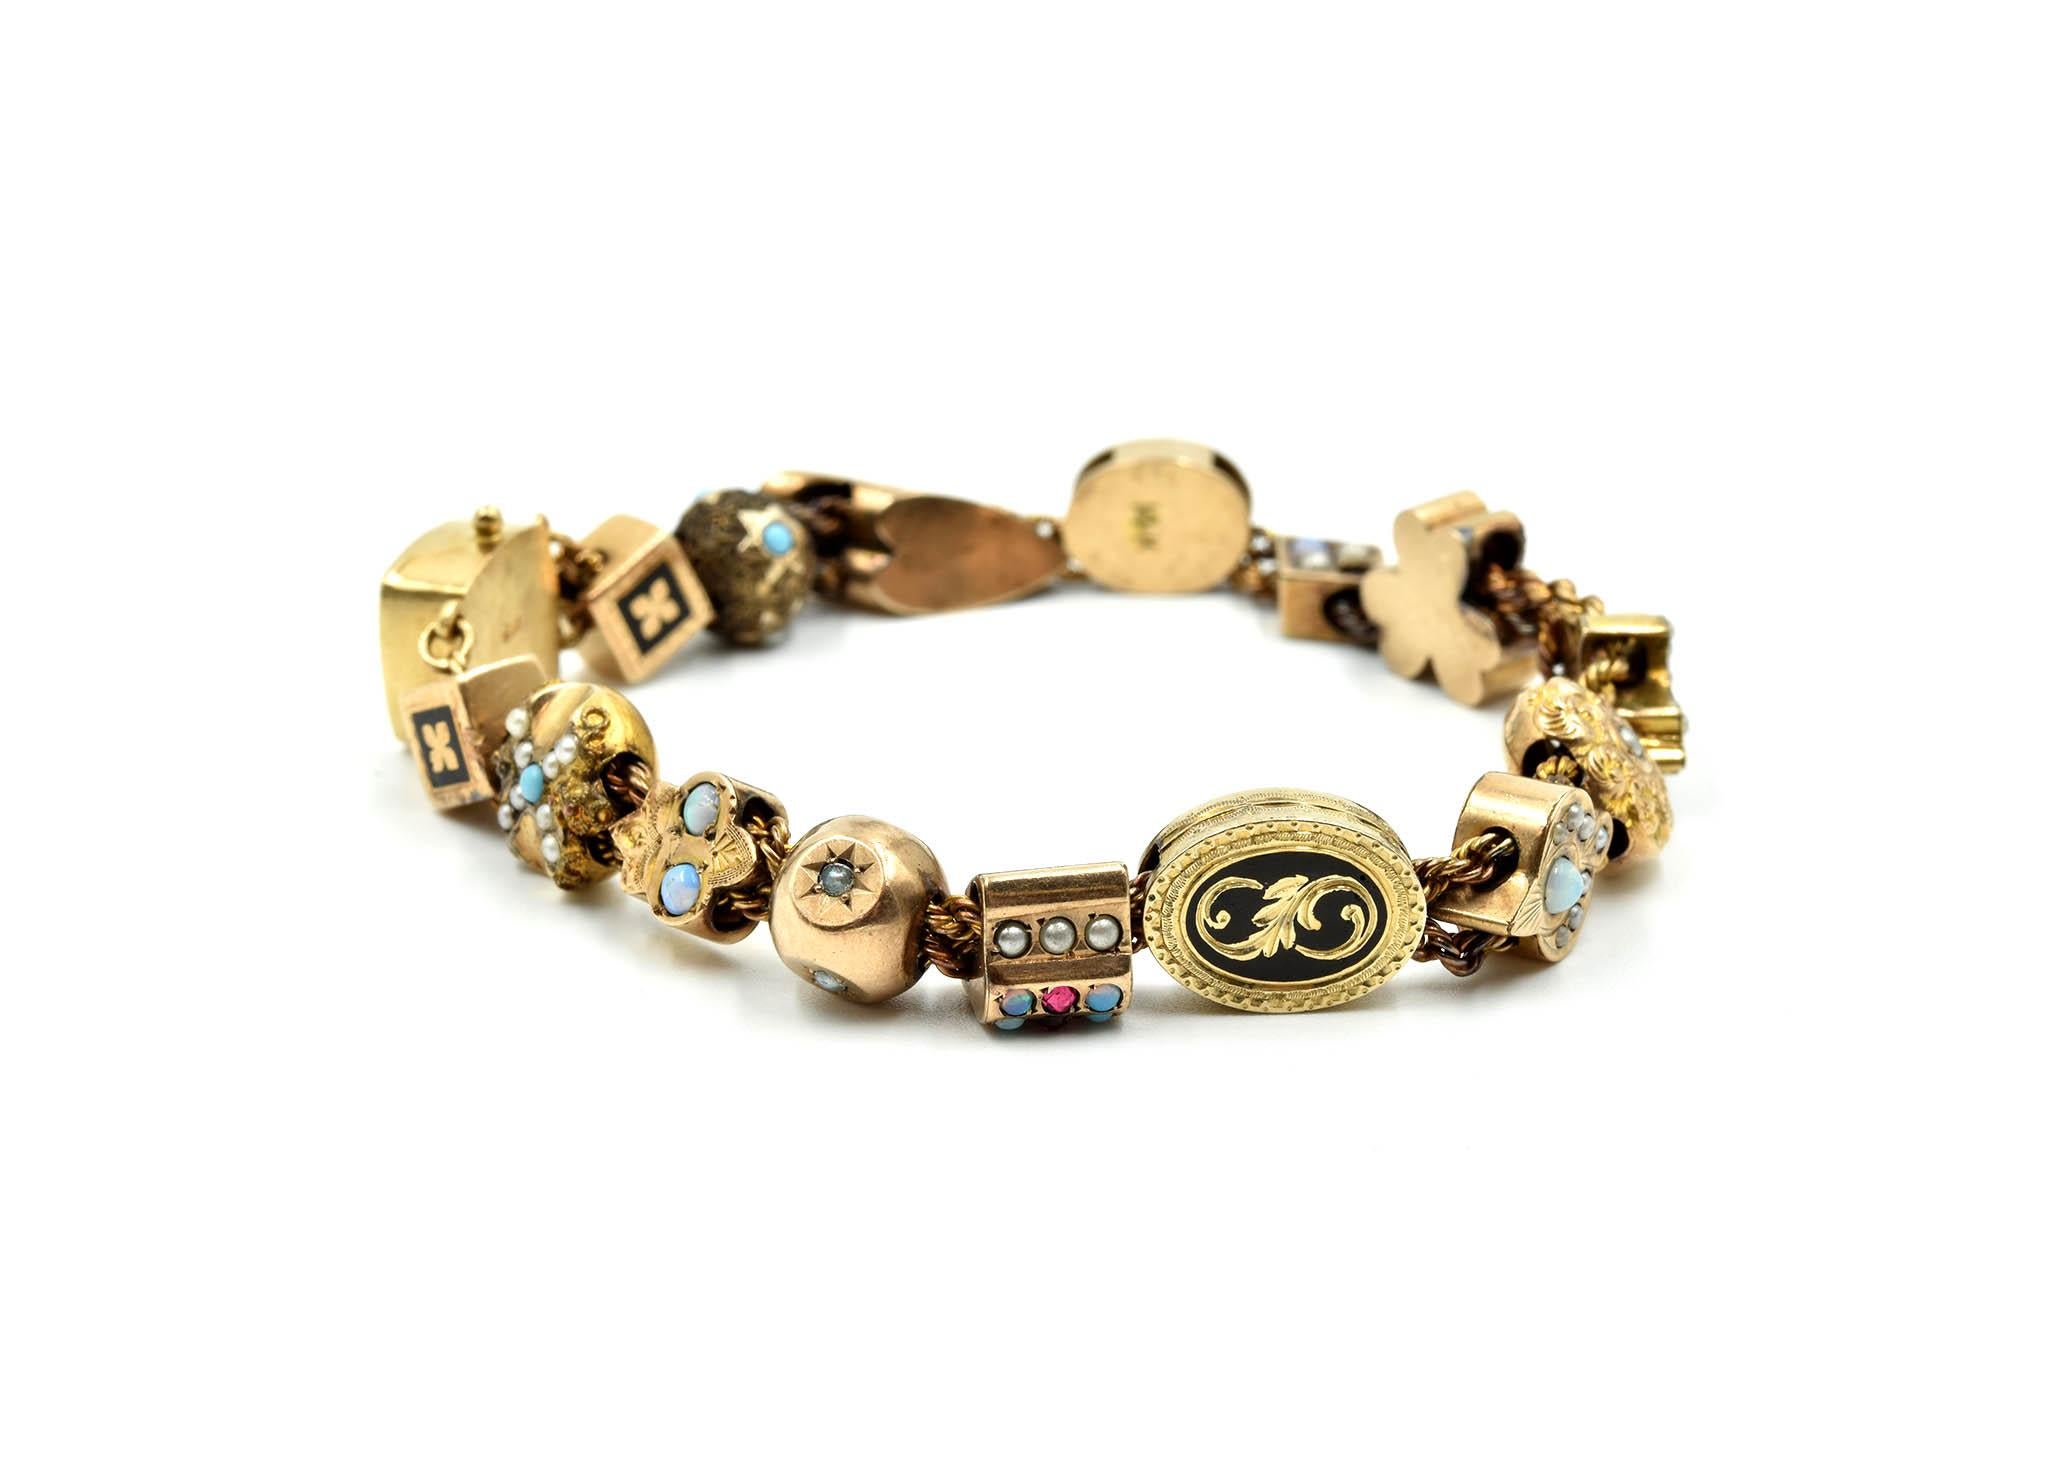 This stunning vintage charm bracelet is made in 14k and 10k yellow gold. The bracelet crafted in both 14k and 10k yellow gold. The charms are made in varying shapes with beautiful colored stones. The bracelet measures 7 ½ inches and weighs 25.2